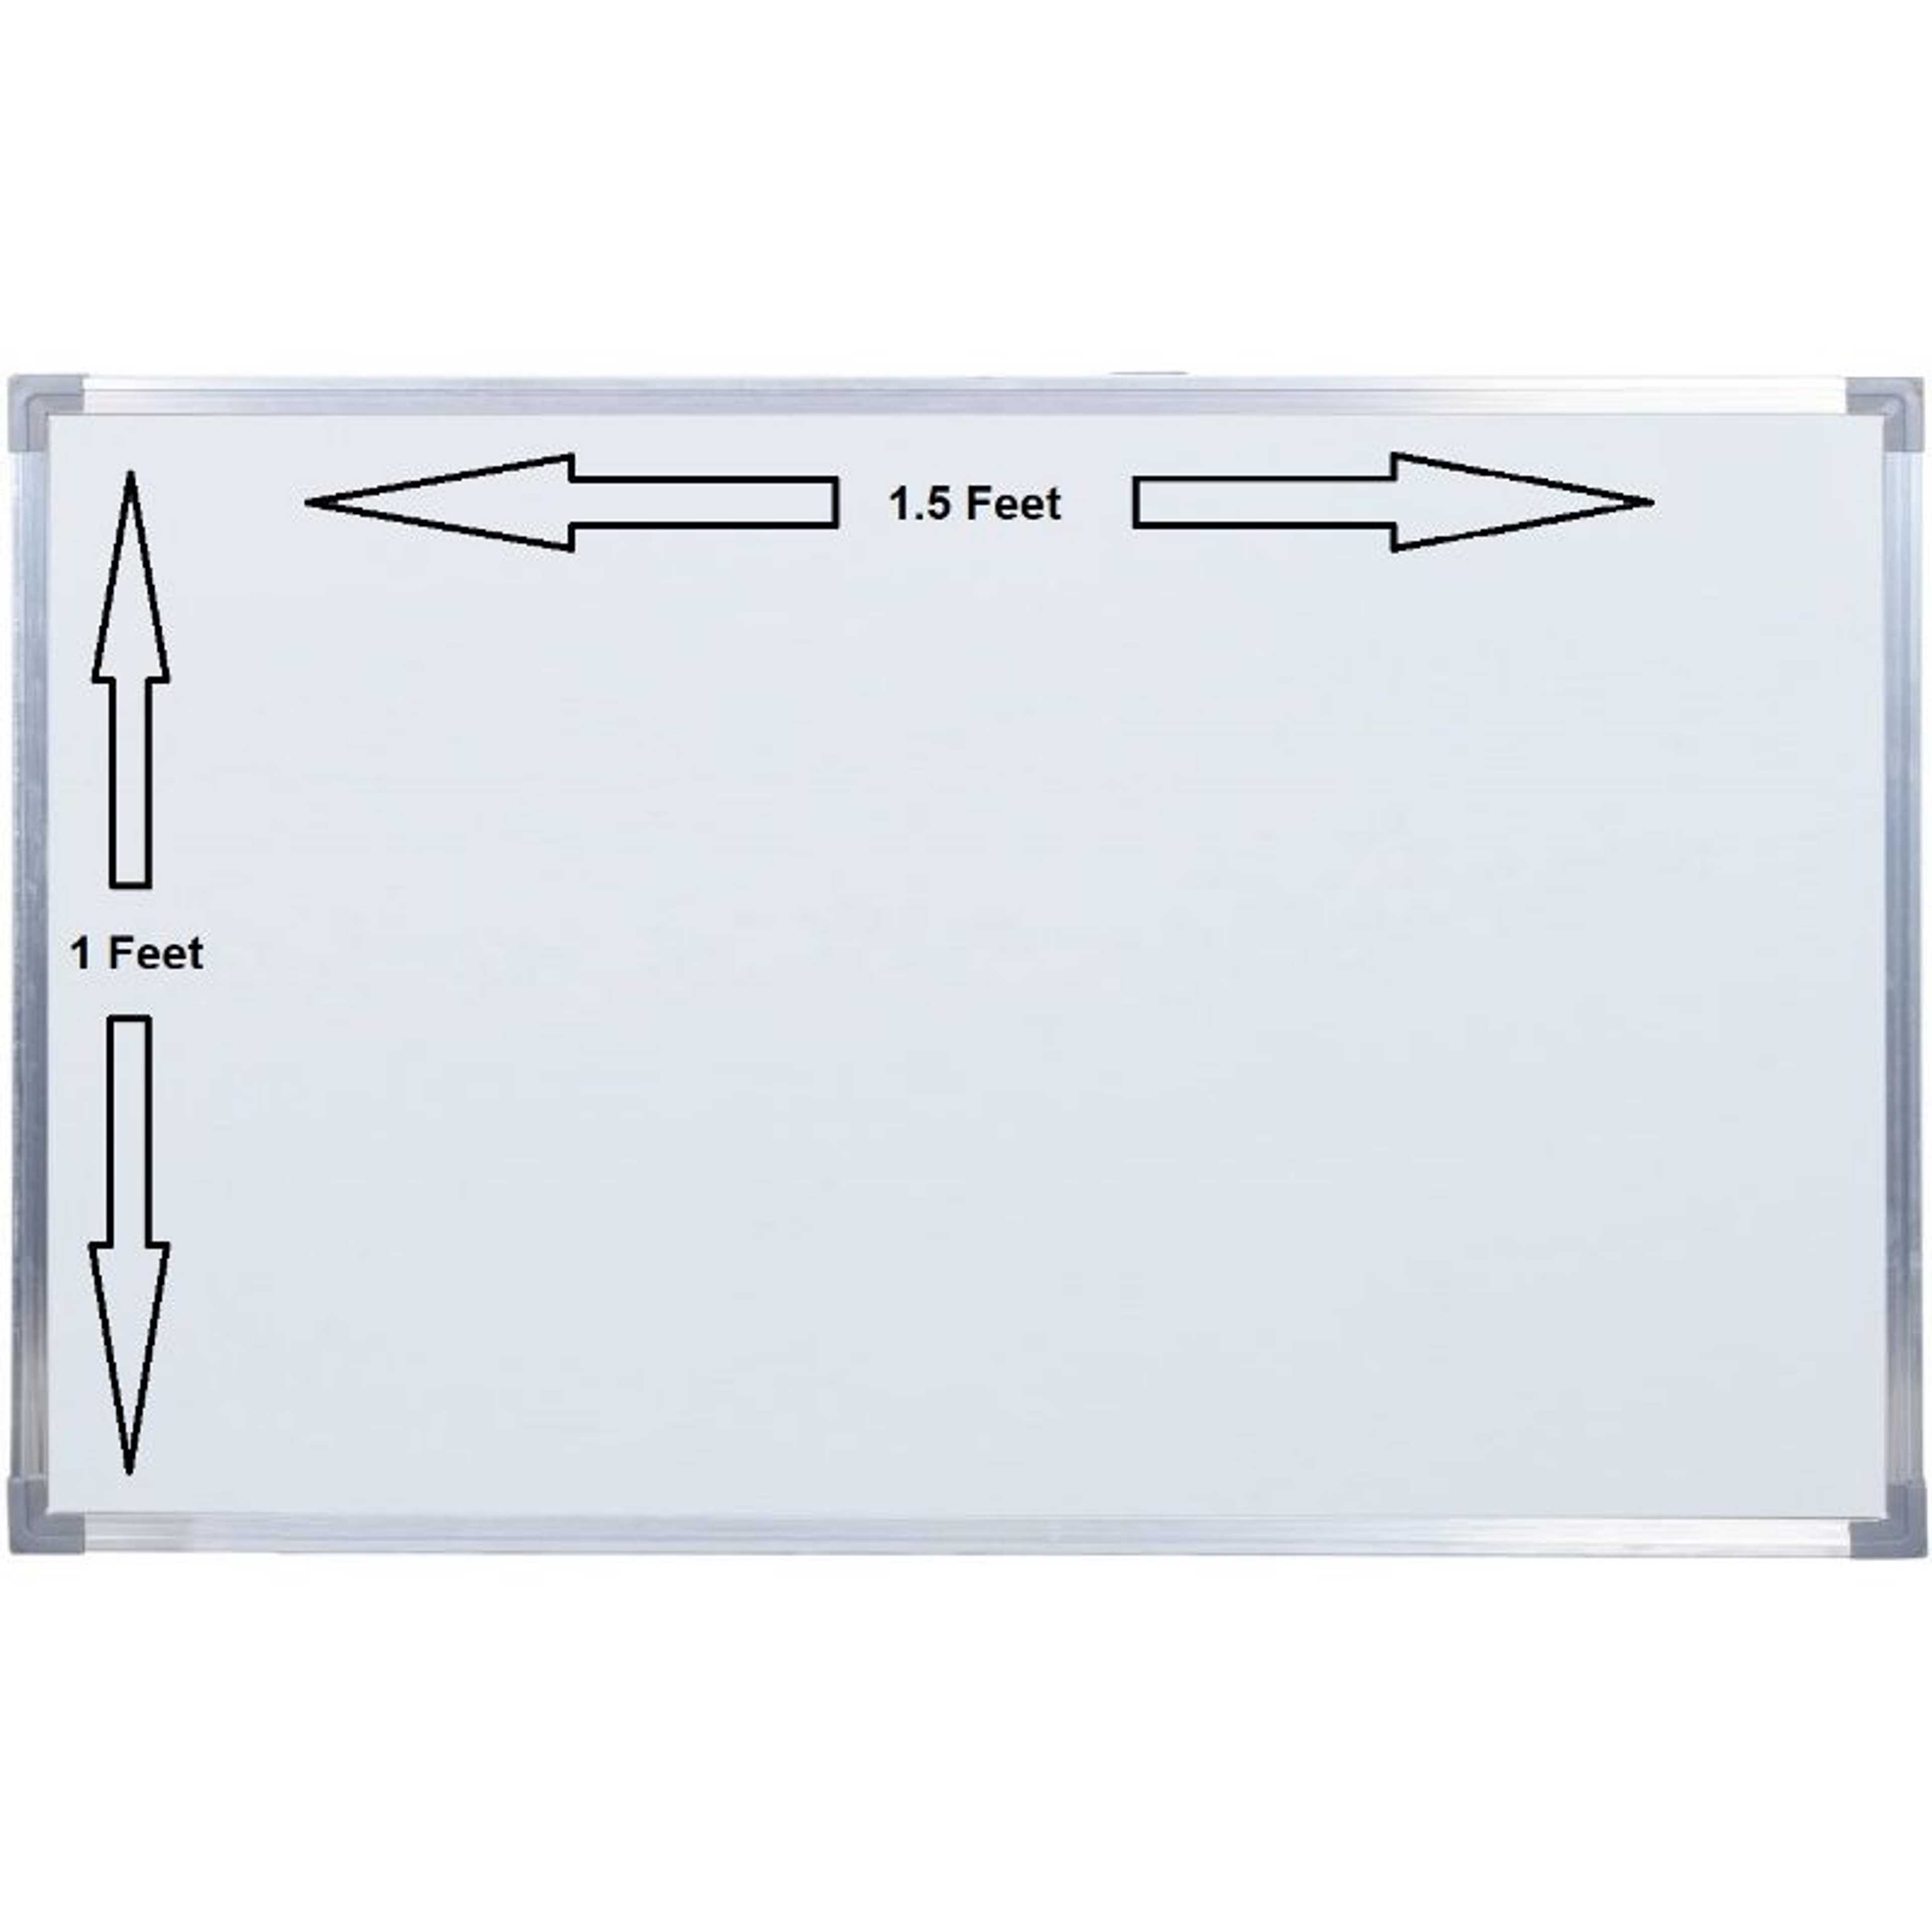 1ft x 1.5ft Dry Erase White Board Hanging Writing Drawing & Planning Whiteboard